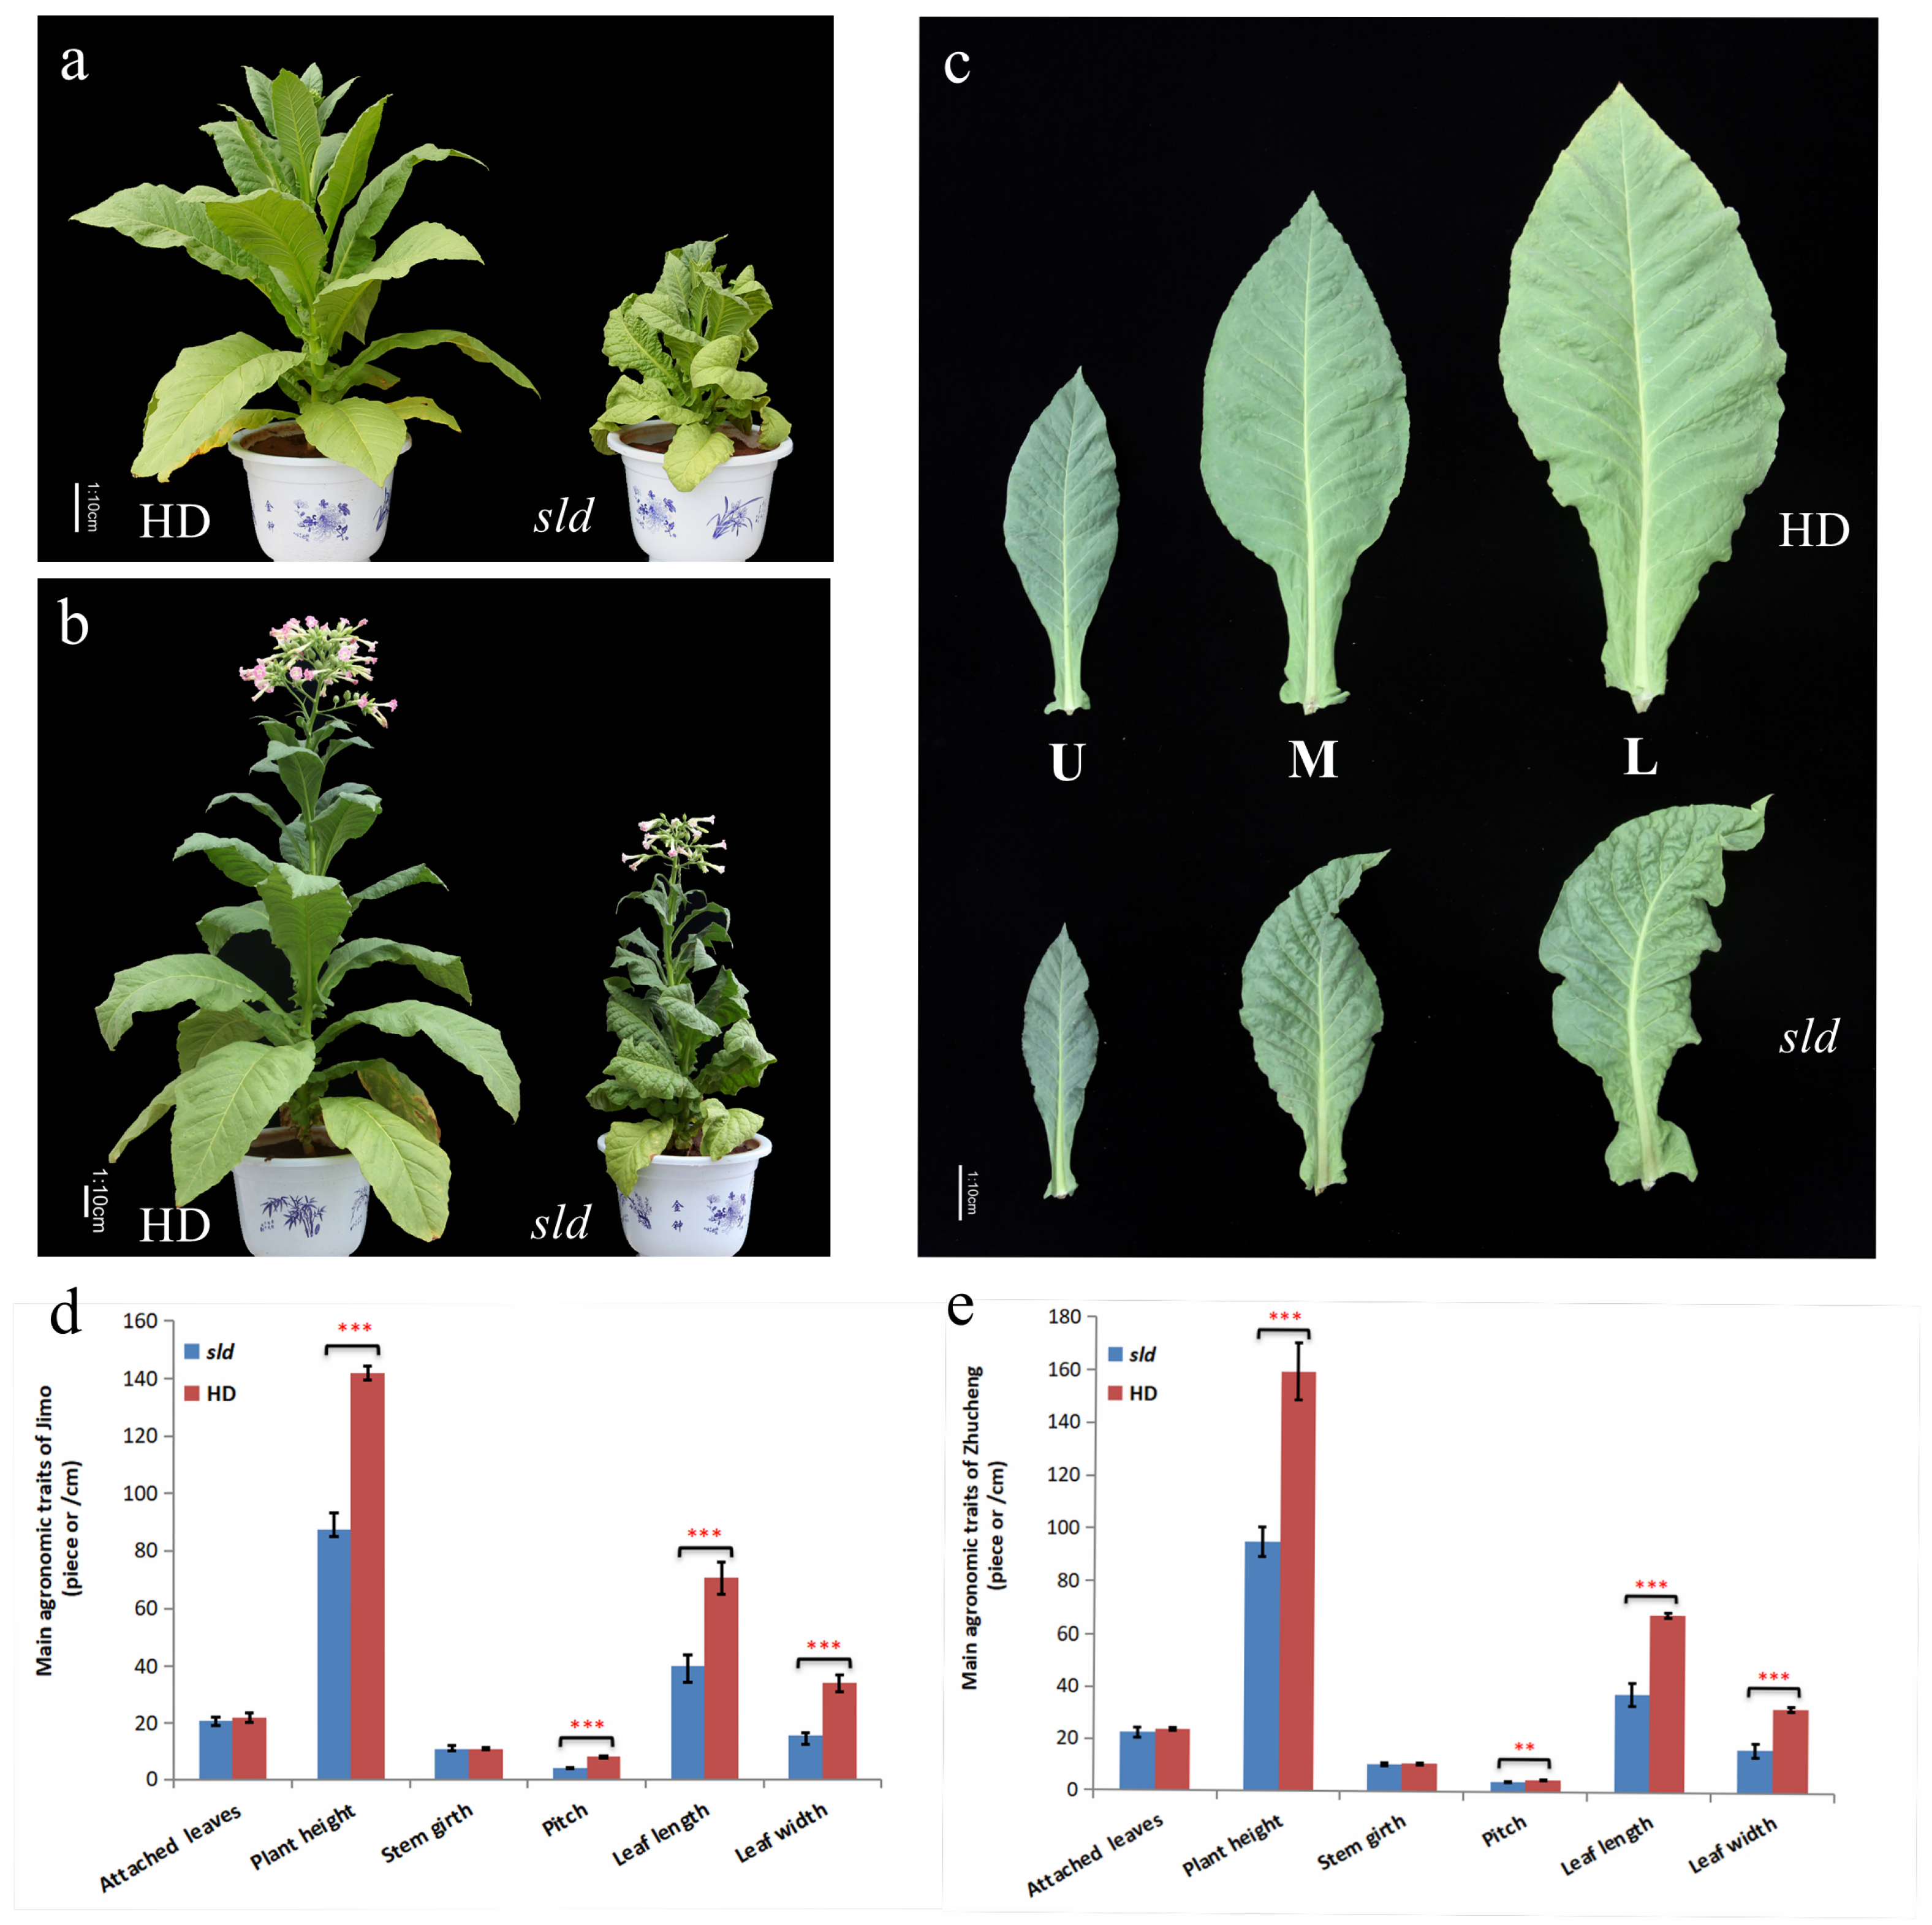 Leaf shape and size of M. spicata (A) control triploid and (B) induced